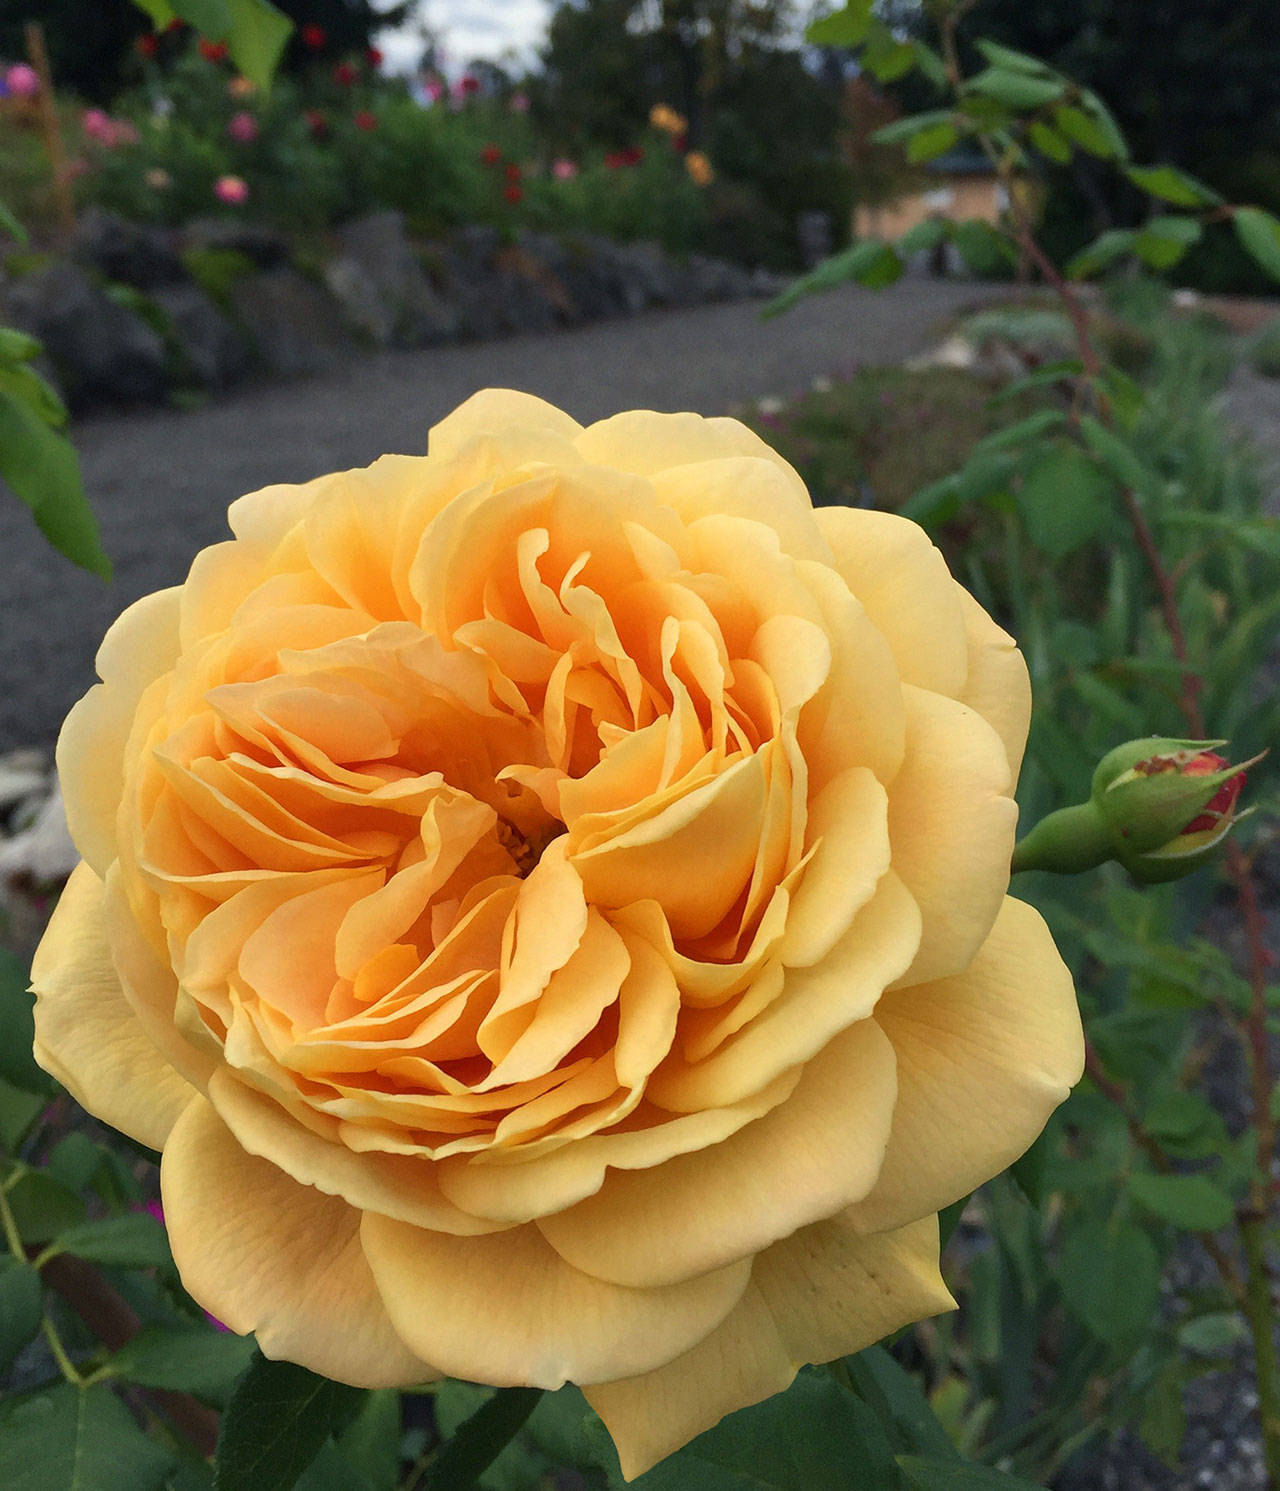 A Golden Celebration Rose, pictured at the Terrace Garden in Sequim. Photo by Renne Emiko Brock